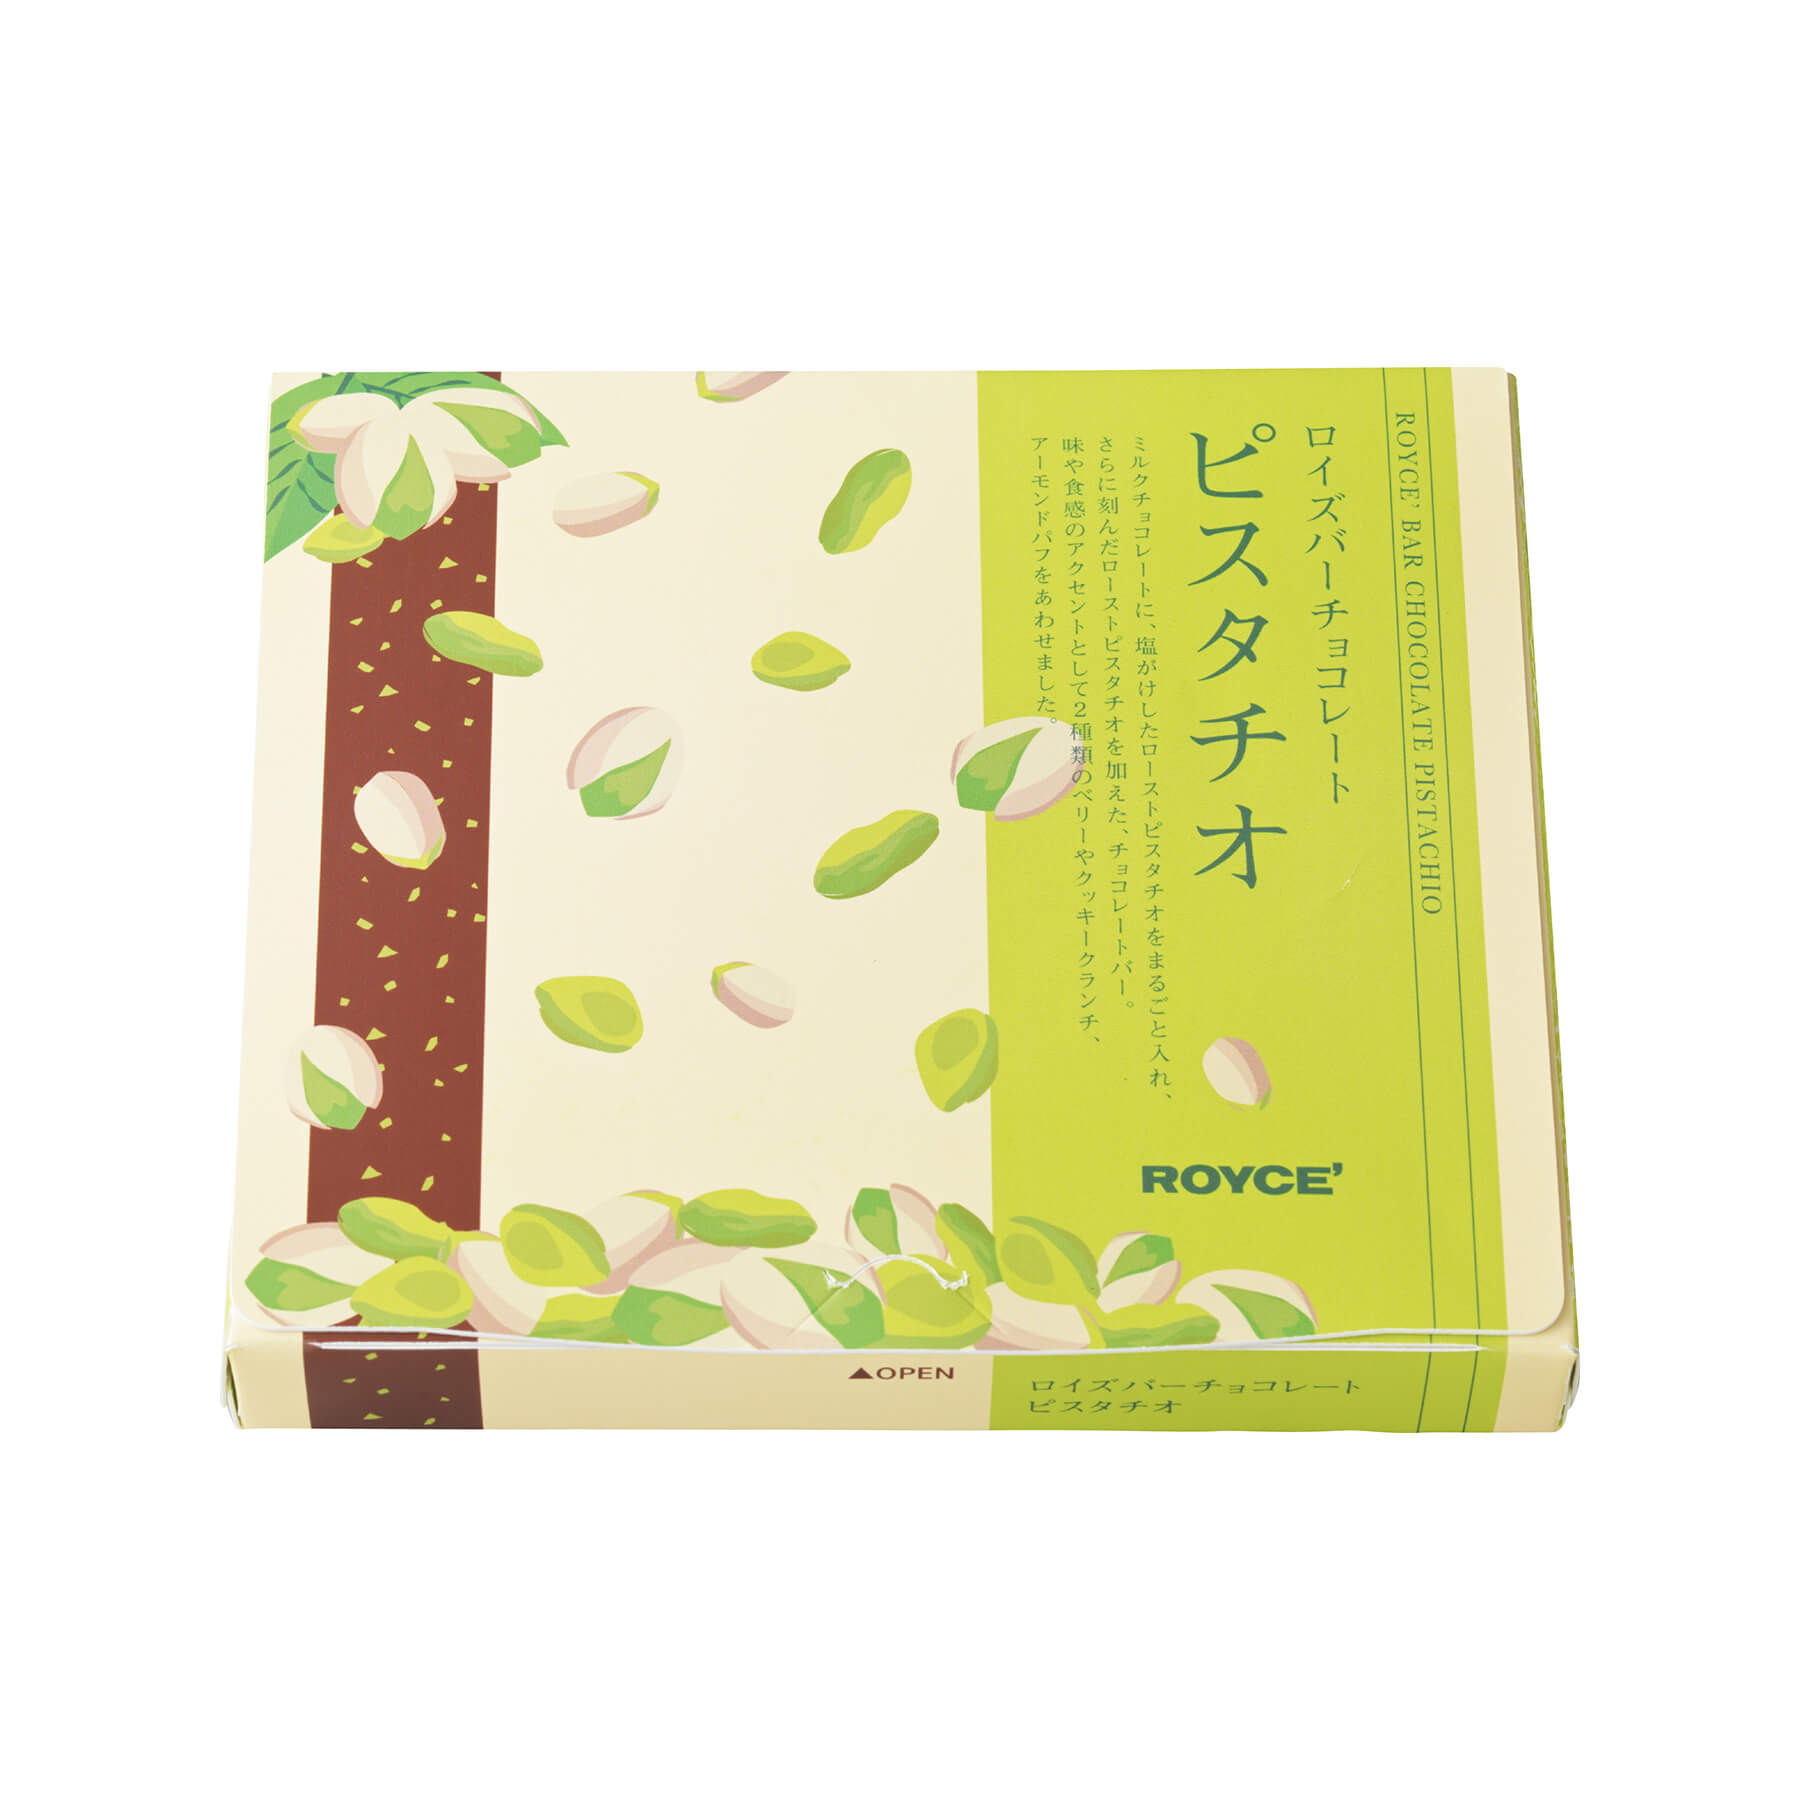 ROYCE' Chocolate - ROYCE' Bar Chocolate "Pistachio" - Image shows a printed box in green, light yellow, and brown with illustrations of pistachios and leaves. Text seen on the box say ROYCE' Bar Chocolate Pistachio ROYCE' Open. Background is in white.